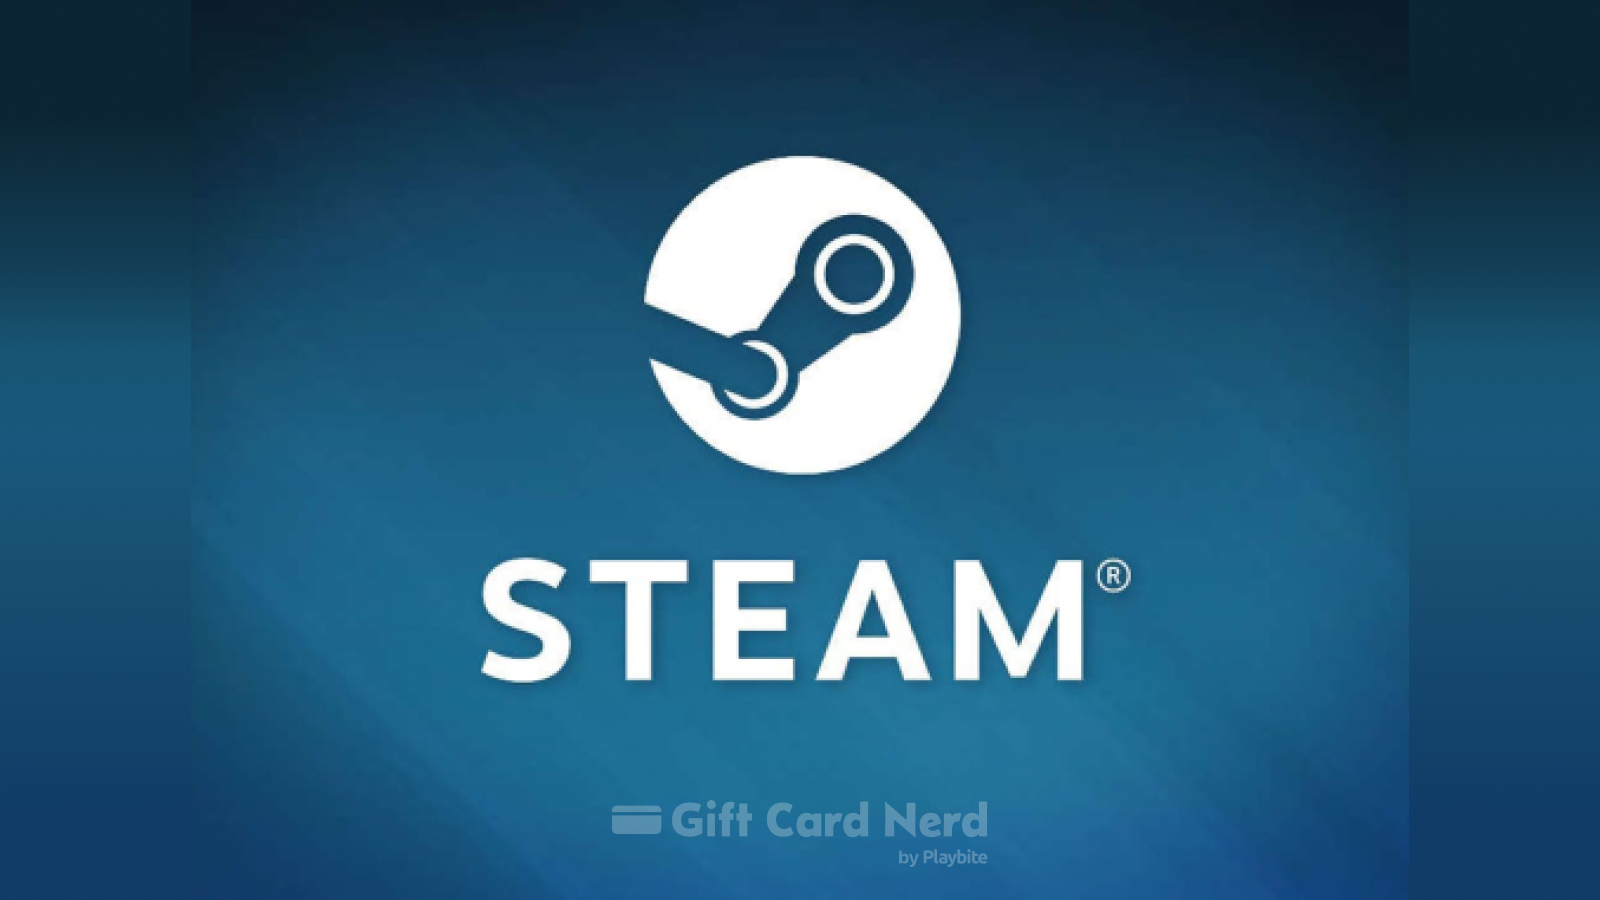 Can I Use a Steam Gift Card on Venmo?